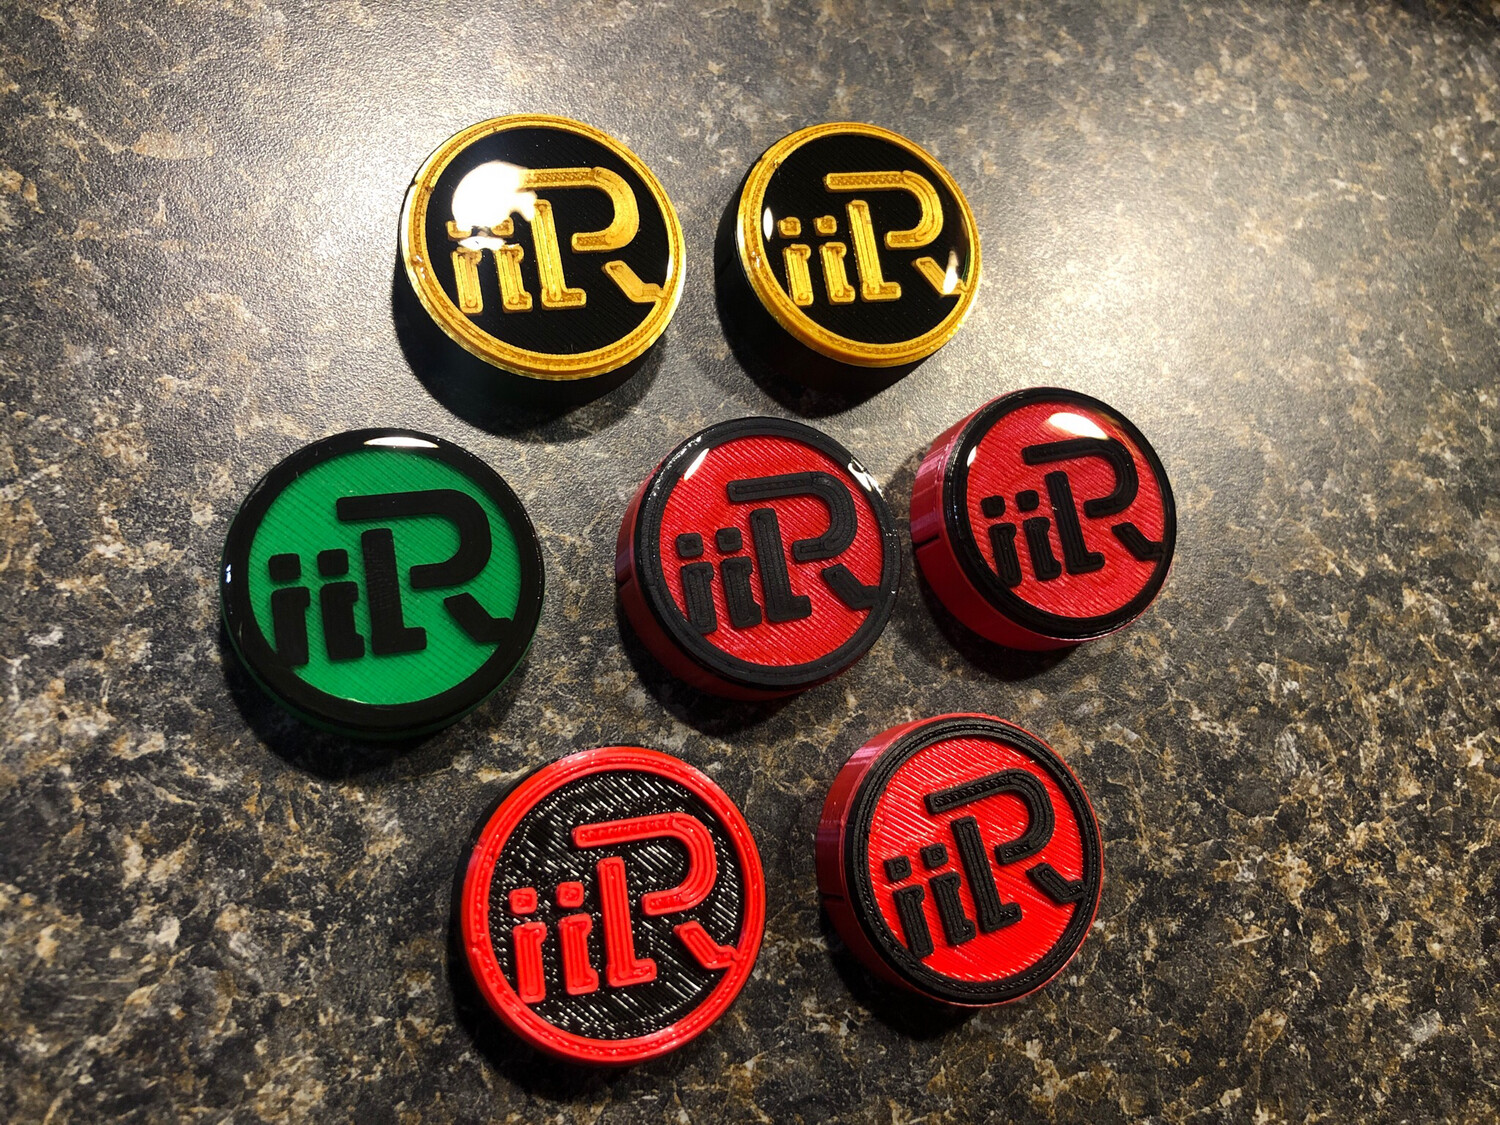 iiRcade Button Cover - Fits all iiRcade buttons! NEW TWO COLOR DESIGN!